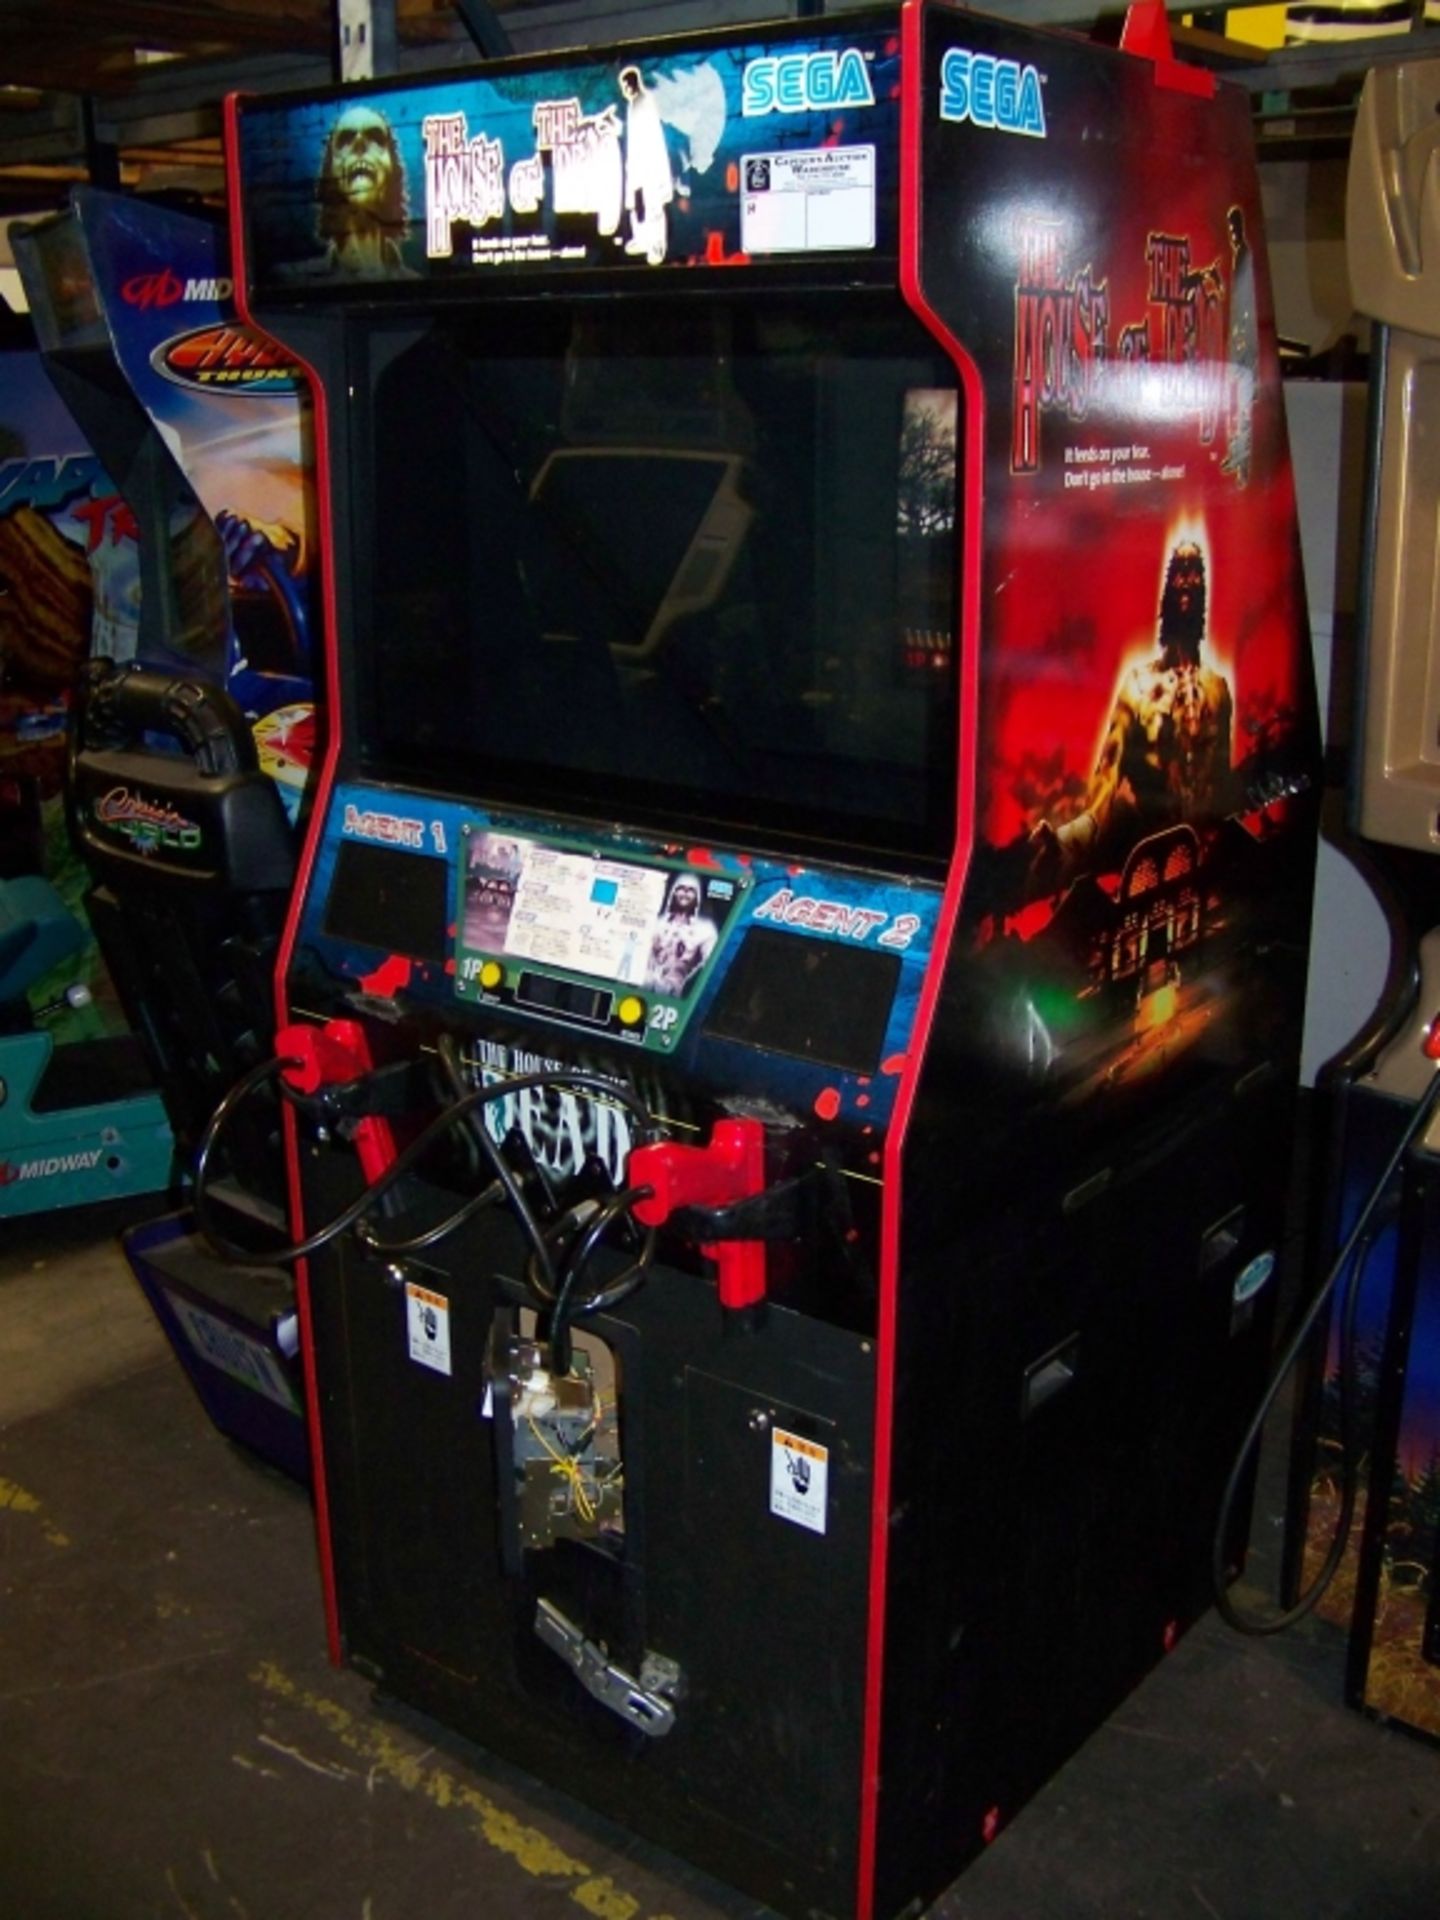 THE HOUSE OF THE DEAD ZOMBIE SHOOTER ARCADE GAME Item is in used condition. Evidence of wear and